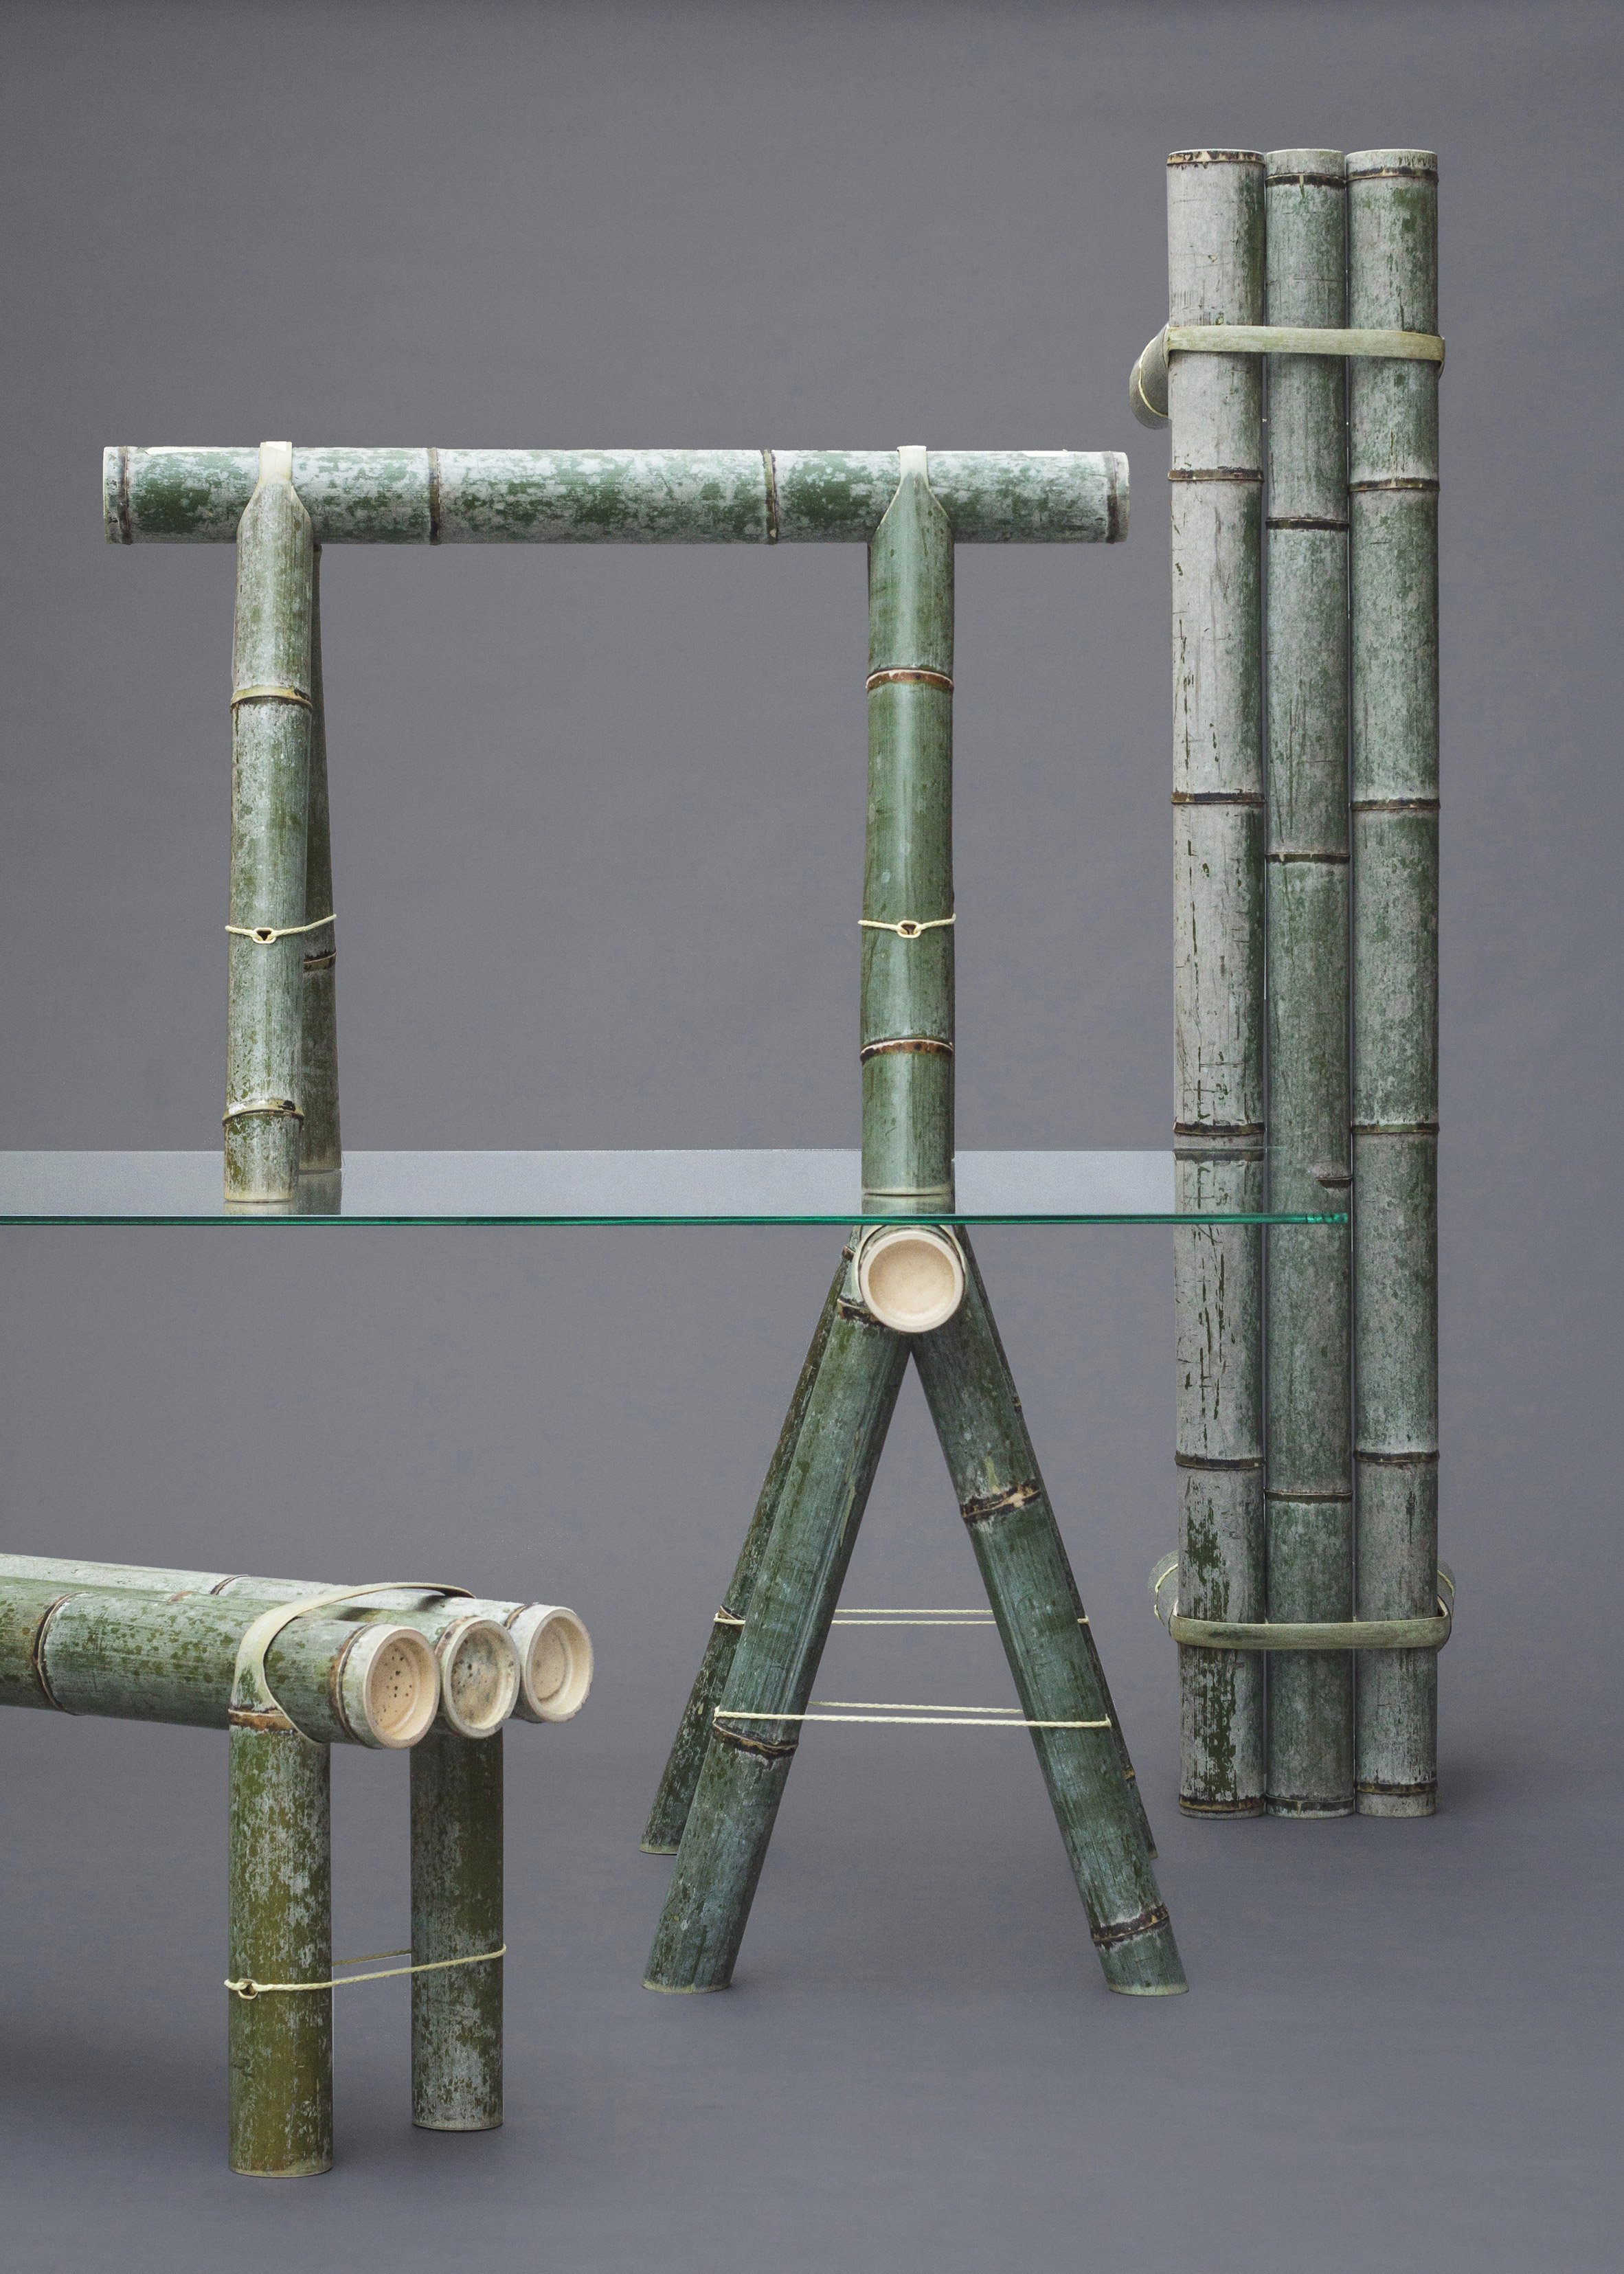 Stefan Diez's Soba bamboo furniture naturally changes colour over time